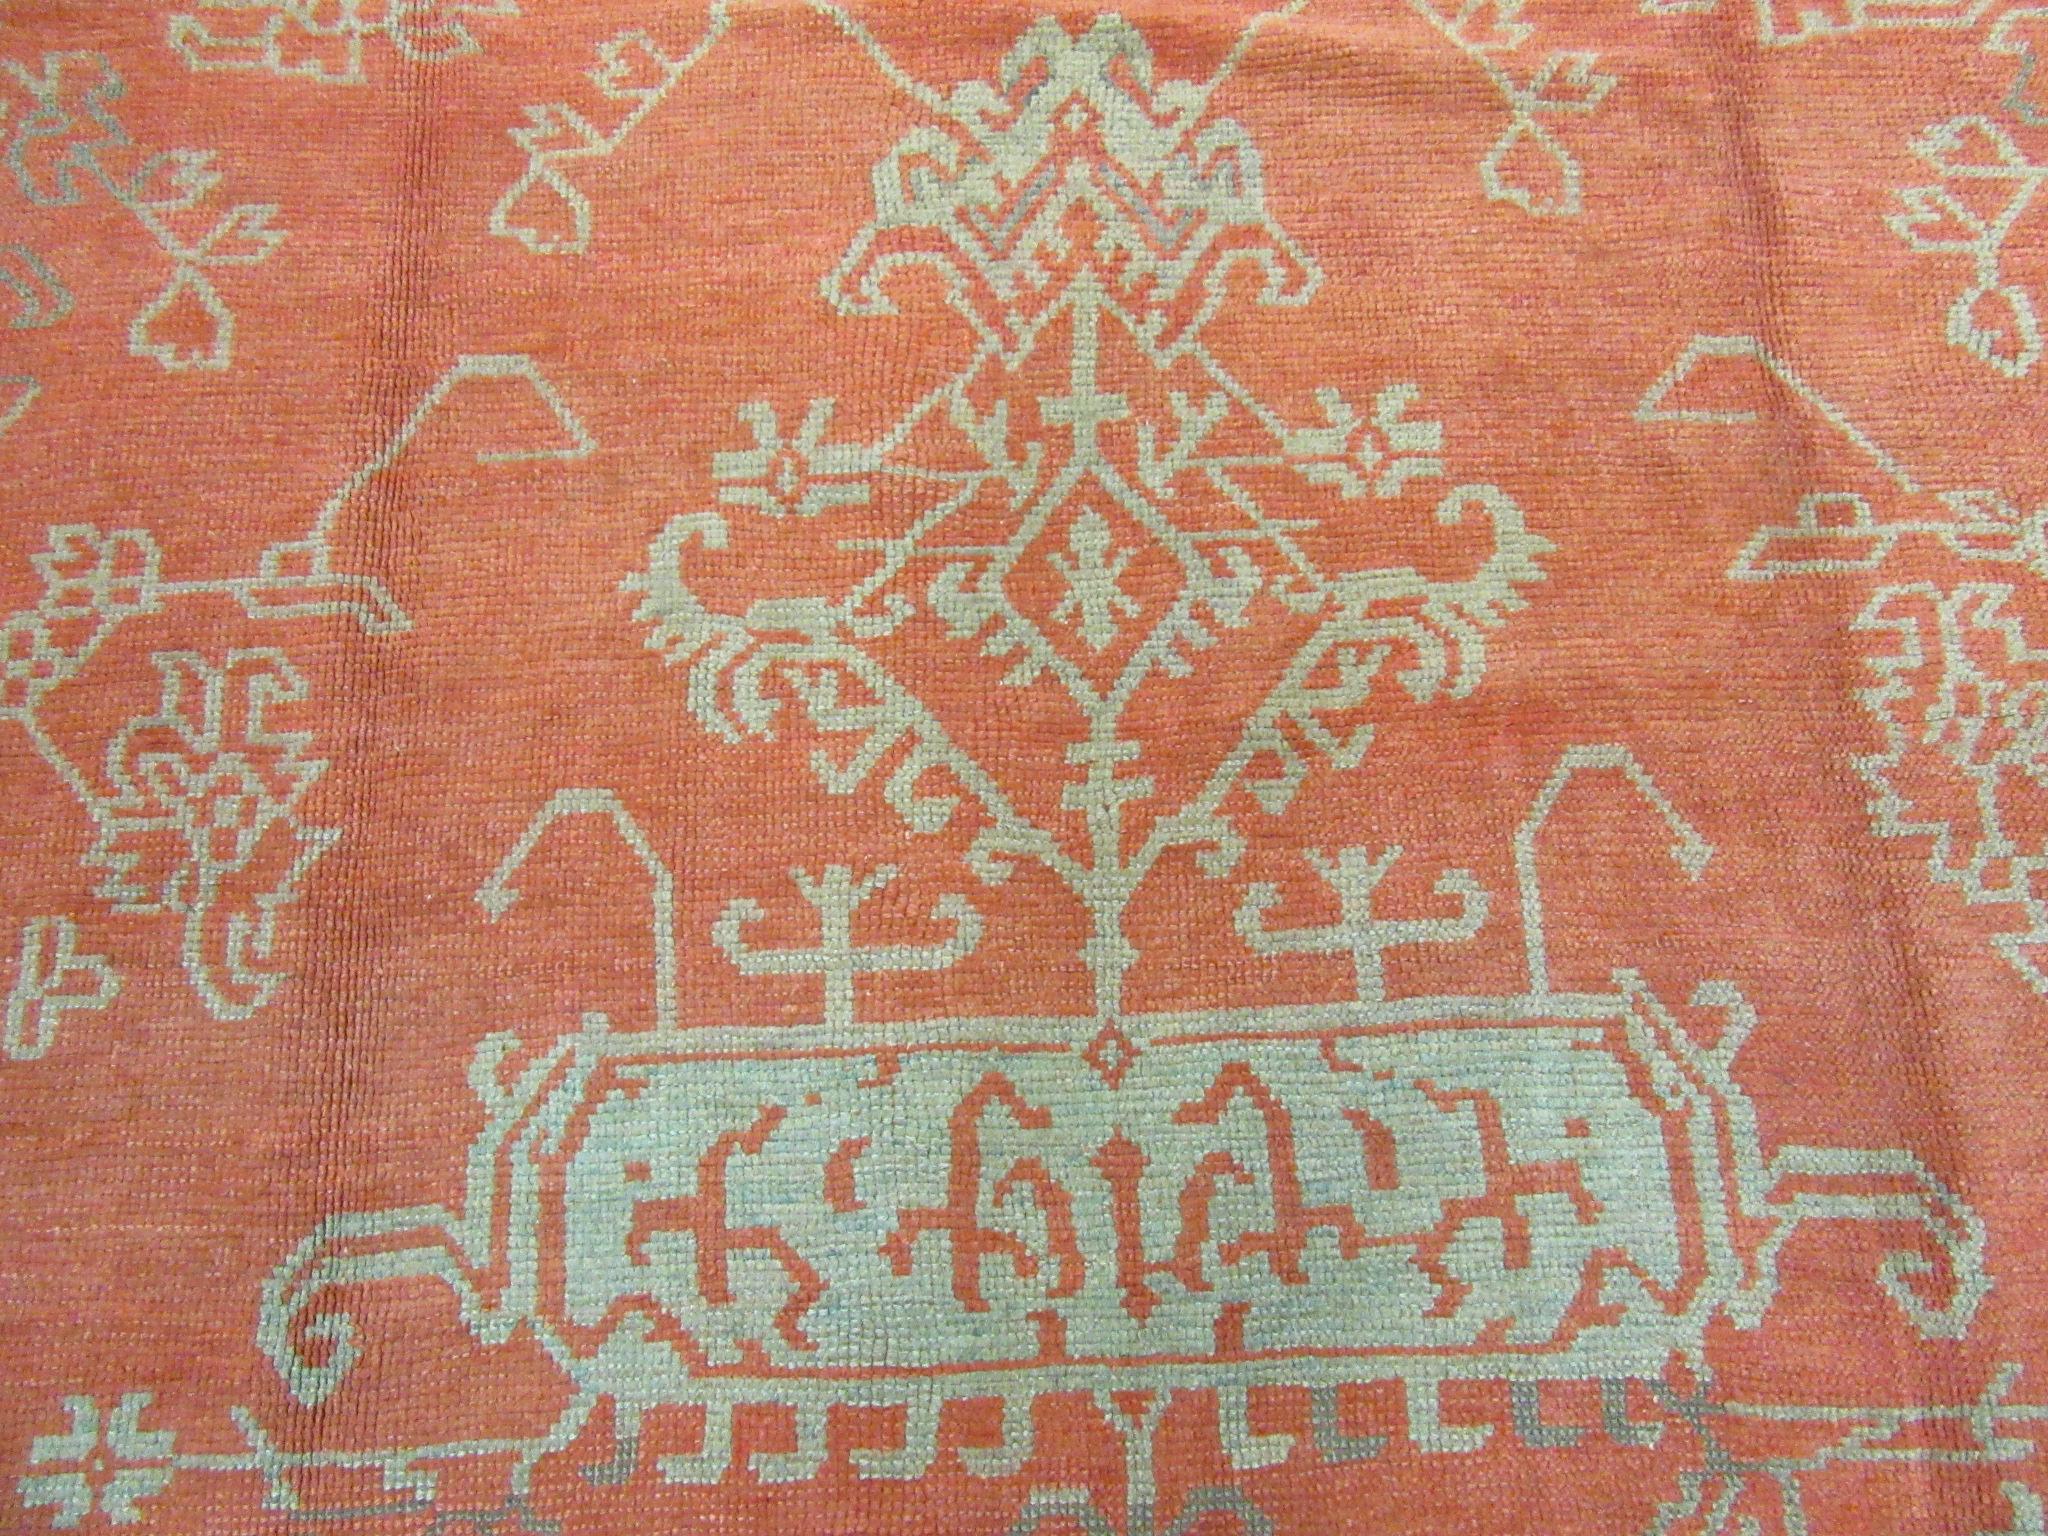 Large Antique Hand-Knotted Wool Coral Red Green Turkish Oushak Rug For Sale 5